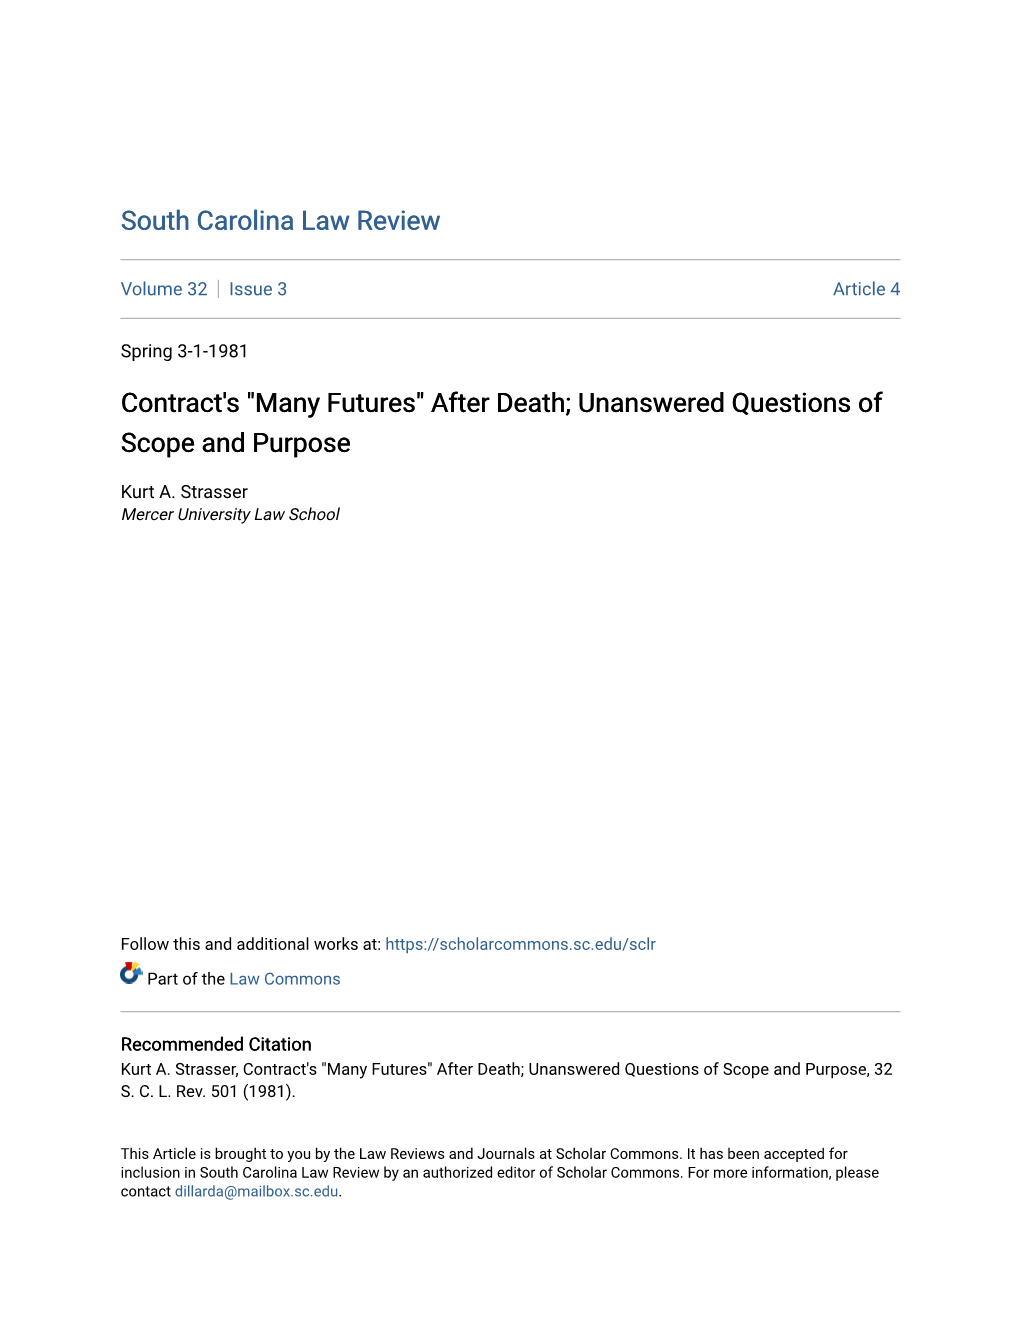 Contract's "Many Futures" After Death; Unanswered Questions of Scope and Purpose